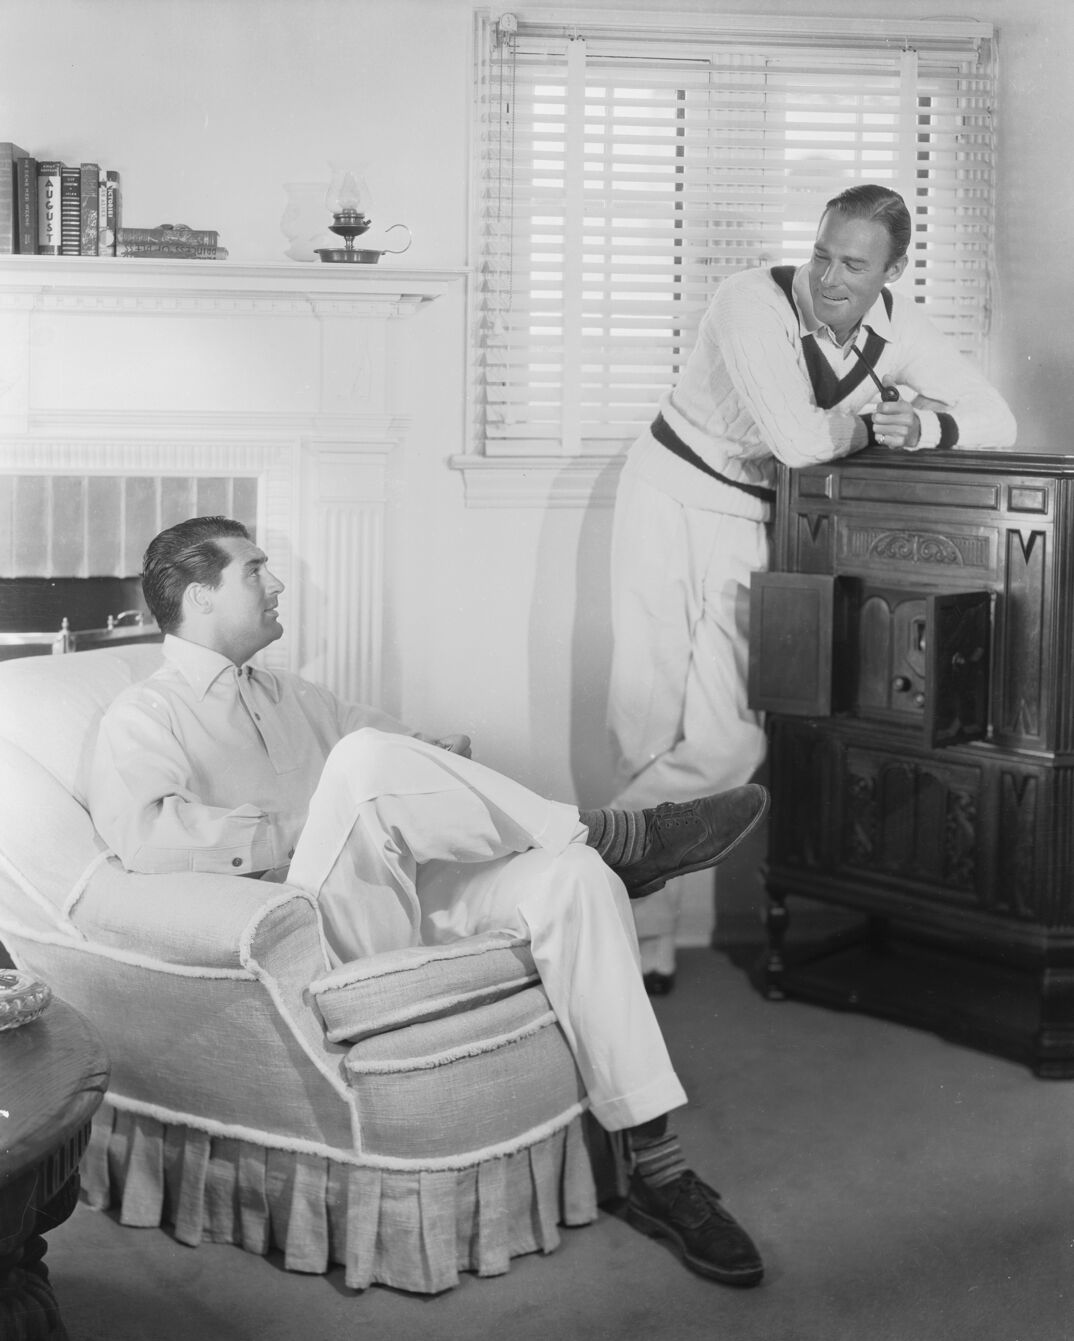 1935:  British born actor Cary Grant (1904 - 1986), born Archibald Leach, with the American actor, Randolph Scott (1898 - 1987). The two stars shared a beach house during the 1930's, which was jokingly known as Bachelor Hall.  (Photo via John Kobal Foundation/Getty Images)